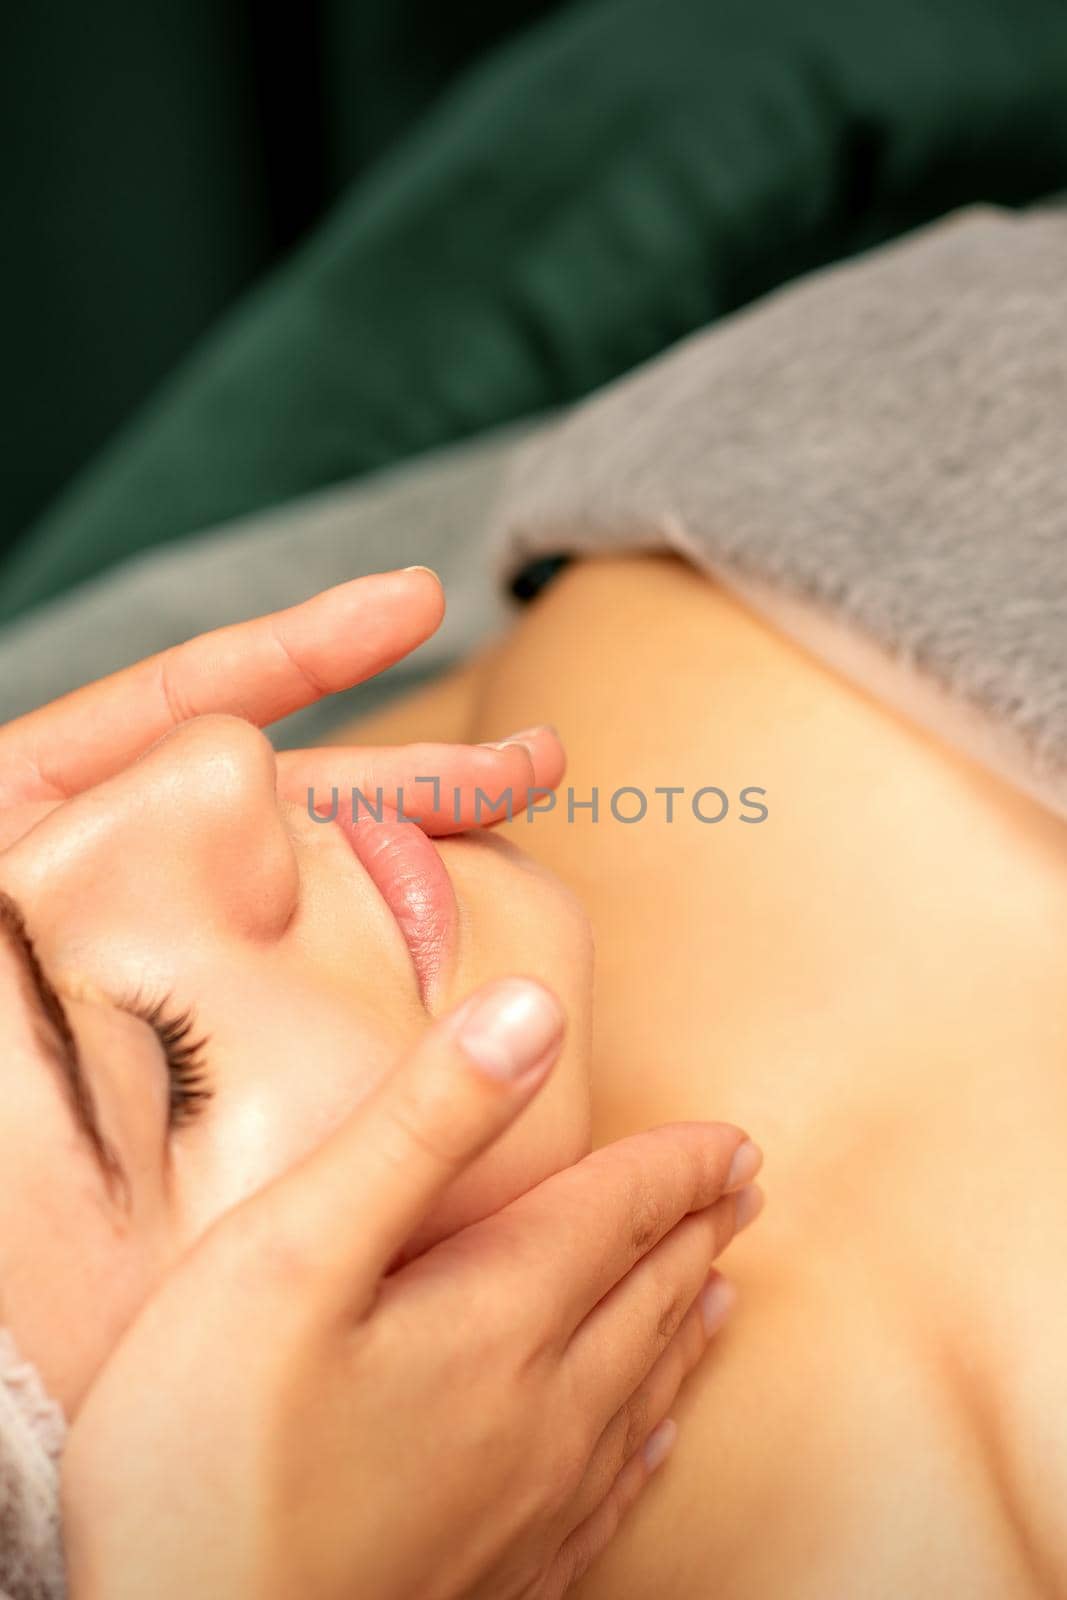 Beautiful young caucasian woman with closed eyes receiving a facial massage in a beauty salon